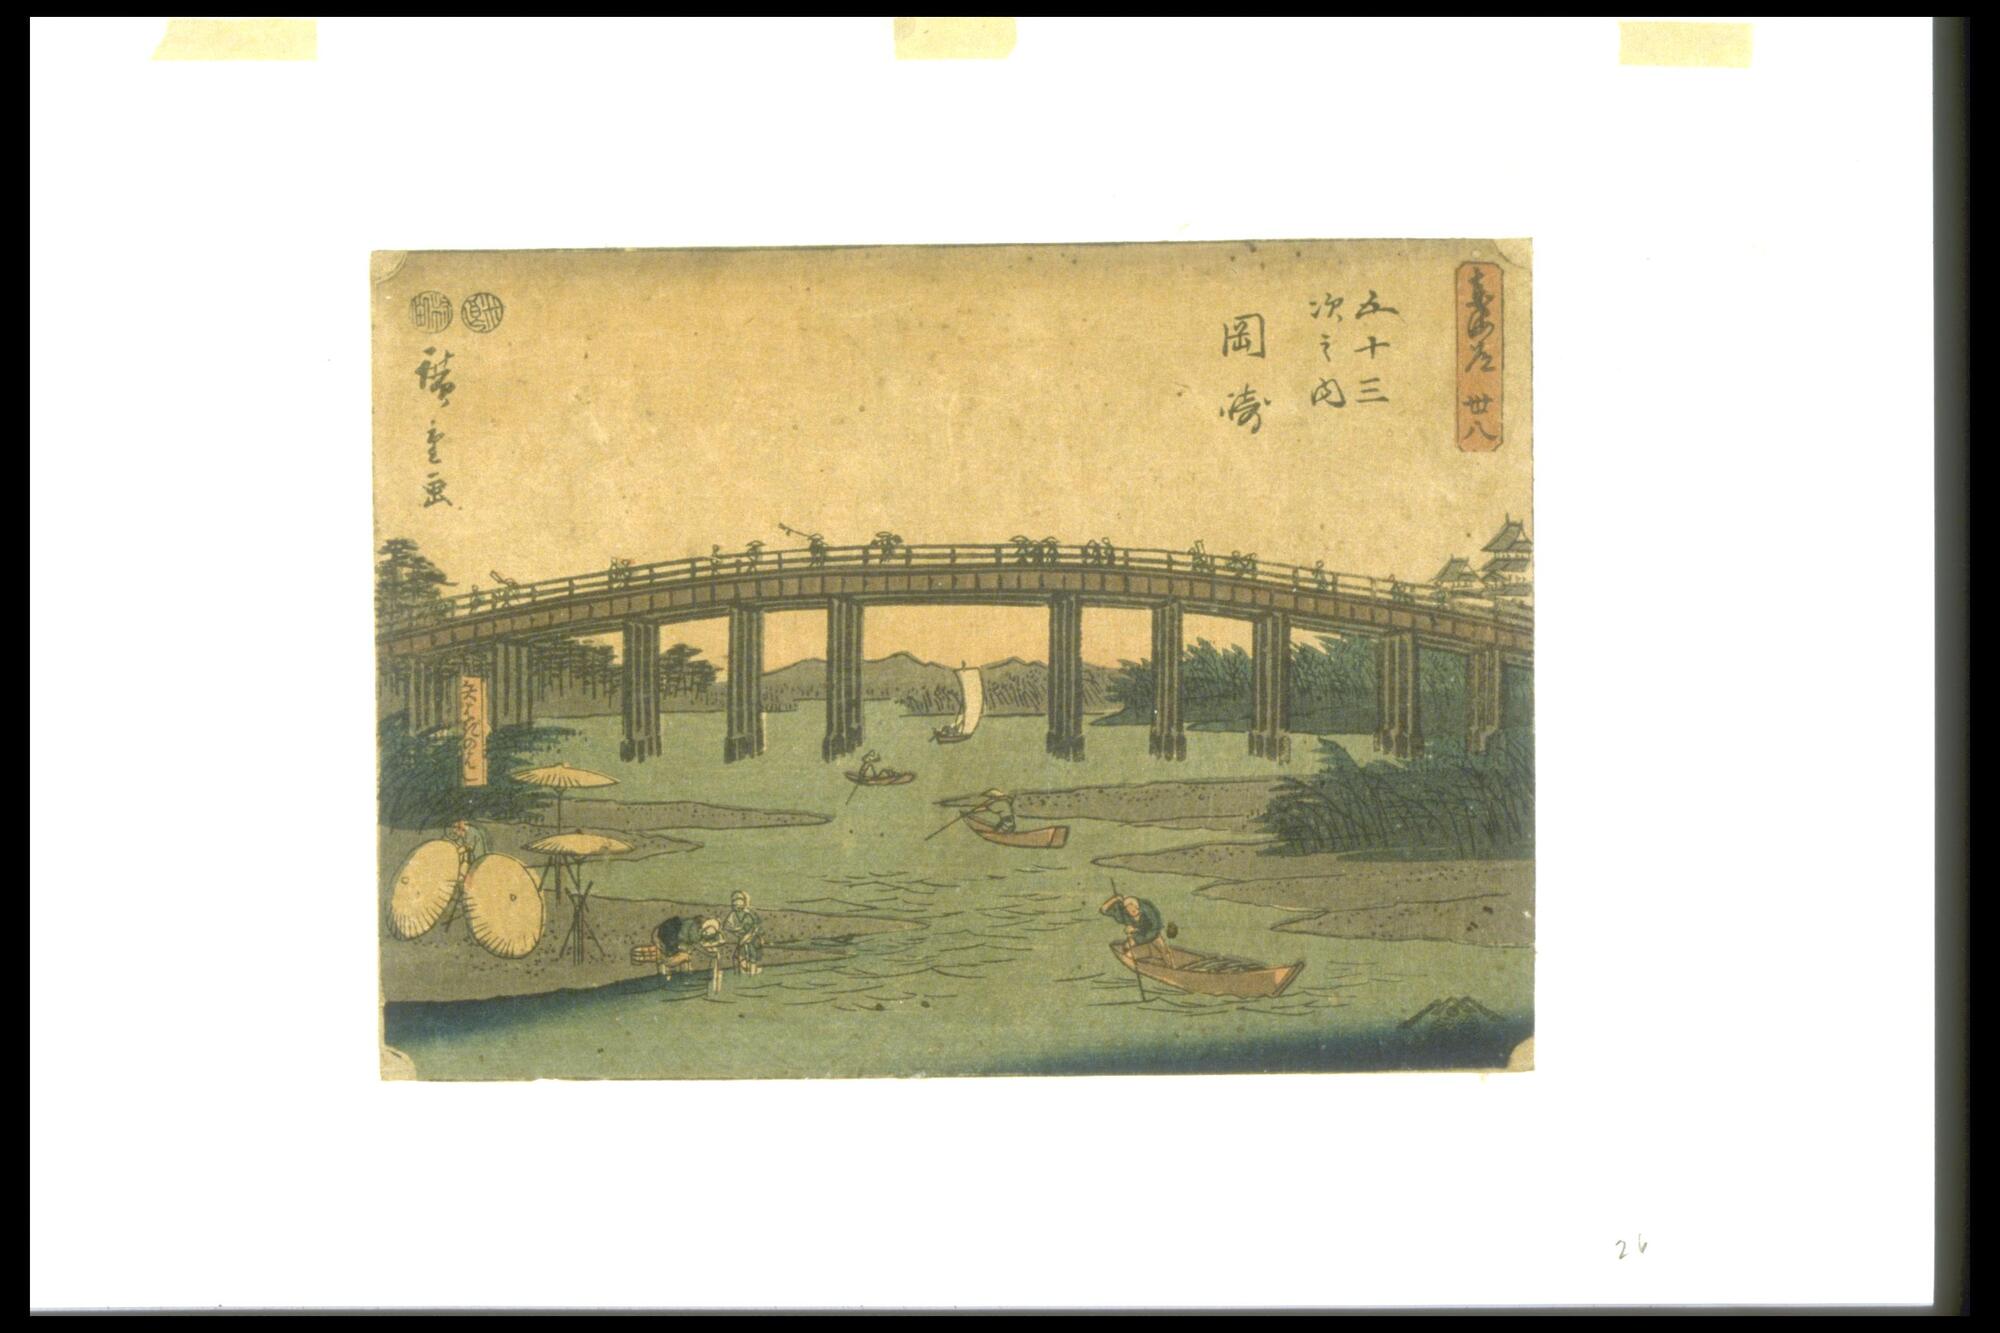 The print depicts an arch bridge over water, with travelers walking across the bridge. Several boats are sailing on the water, while two fishermen are standing on the shallow area by the waterbank.